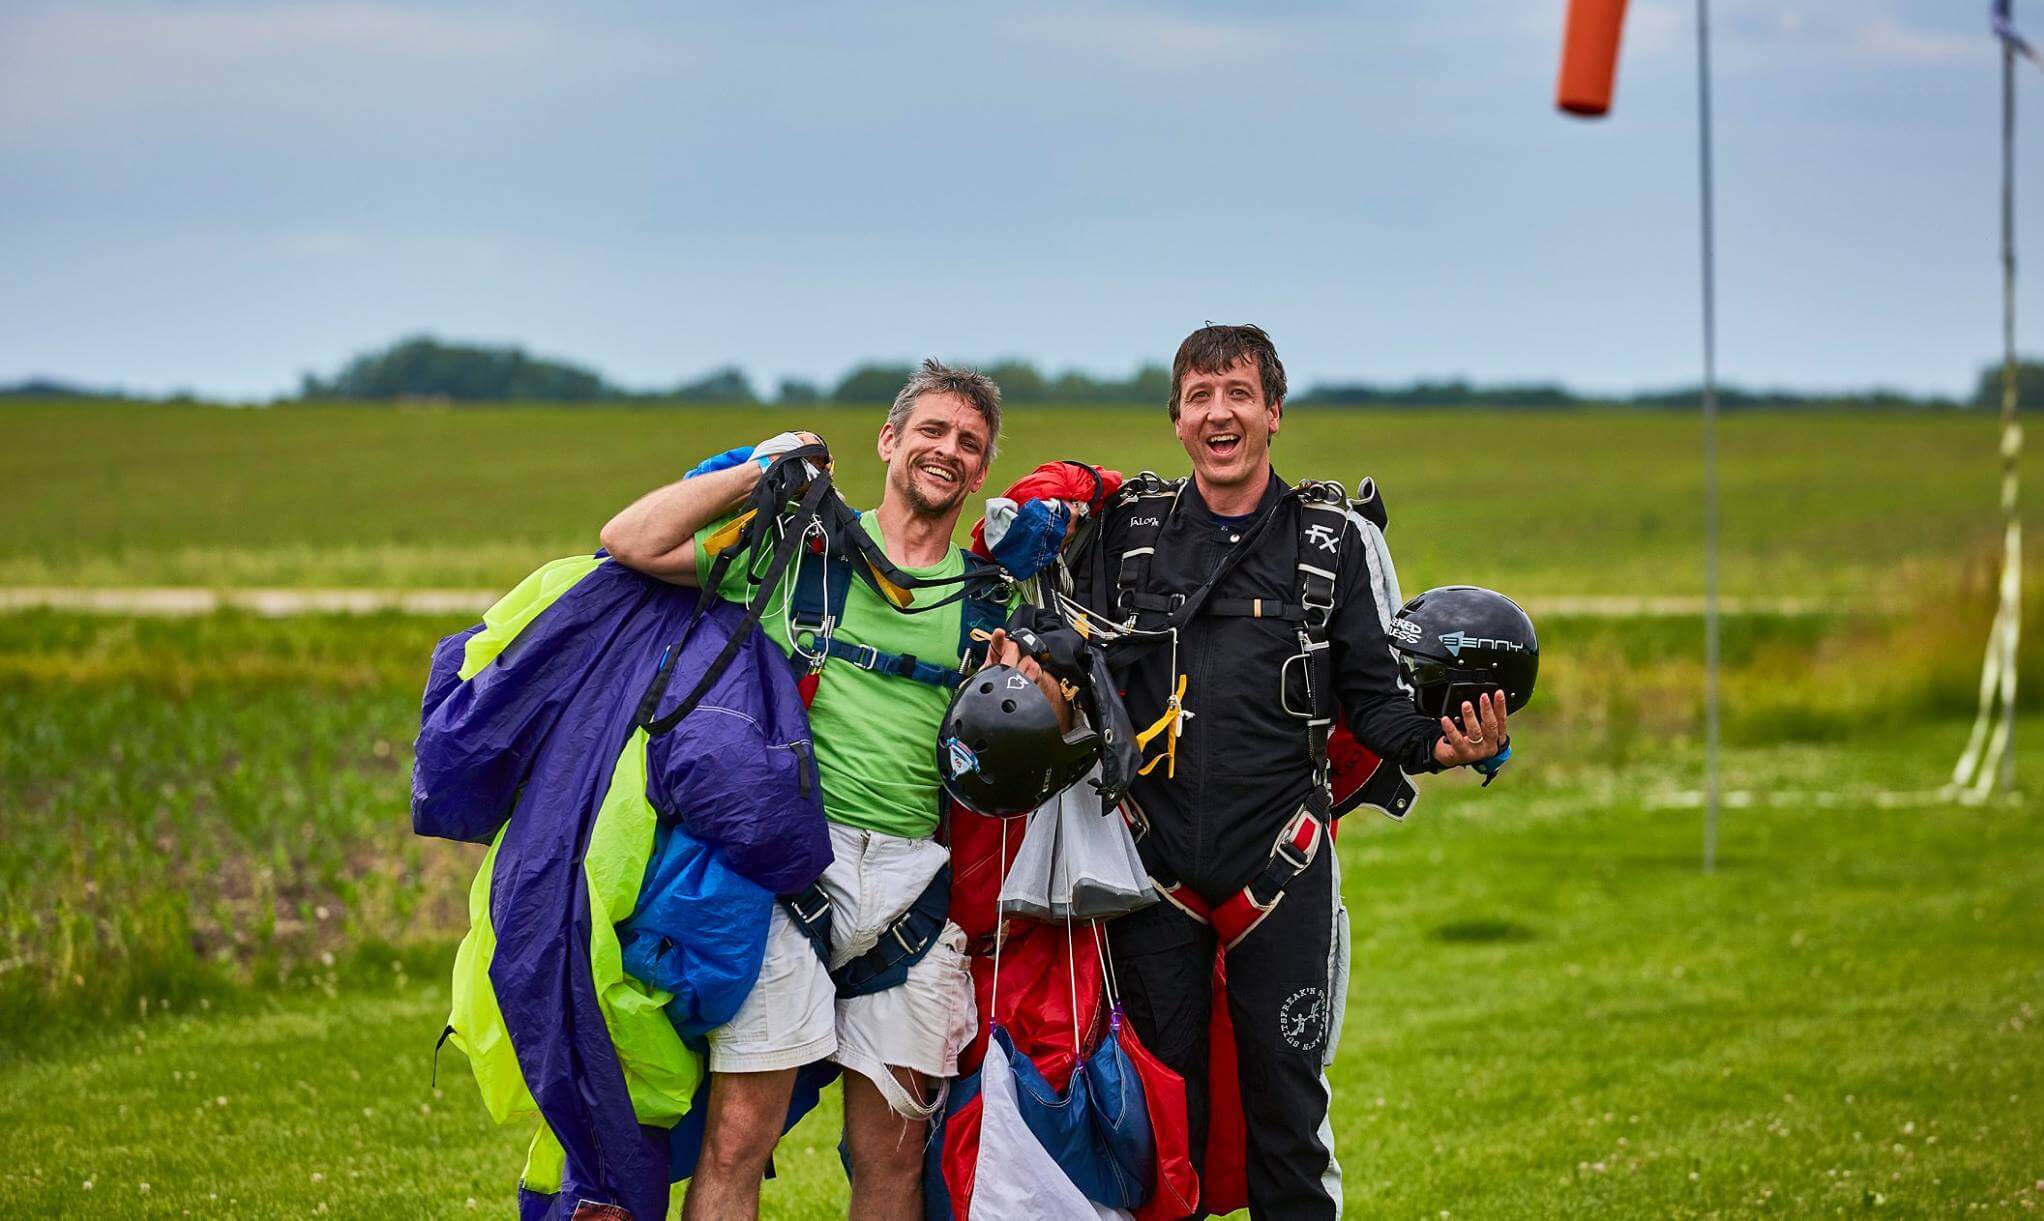 About us Seven Hills Skydivers of Madison, WI